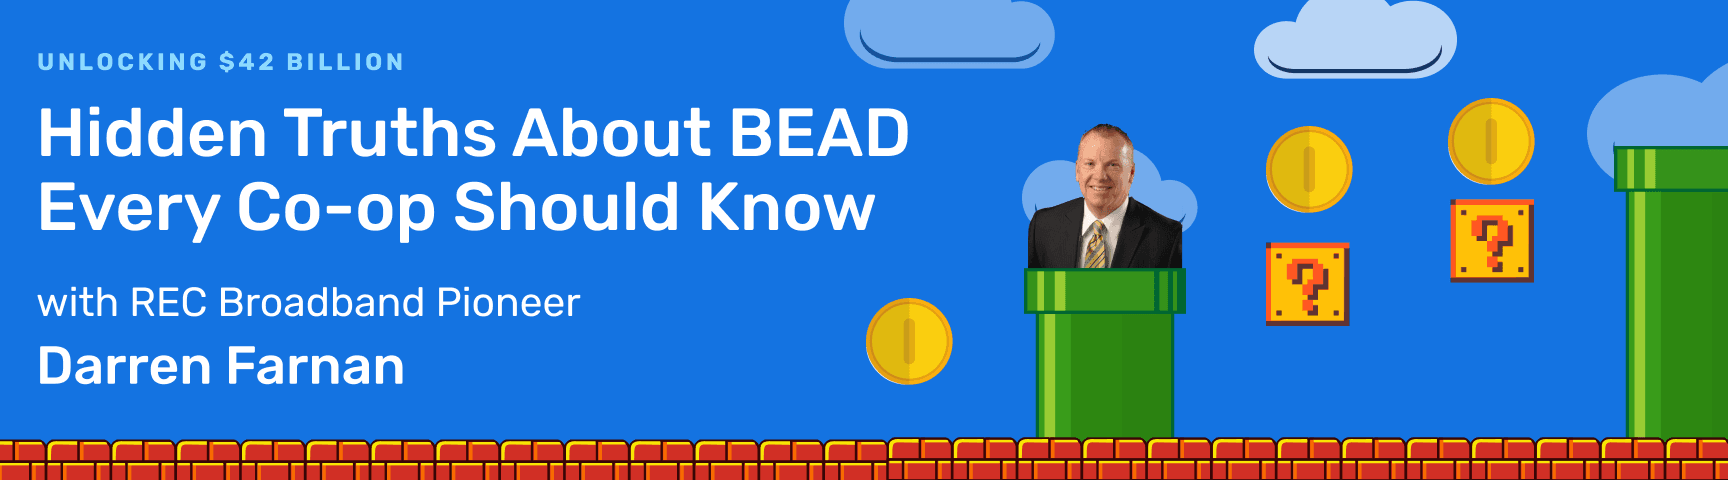 Hidden Truths About BEAD Every Co-op Should Know with REC Broadband Pioneer Darren Farnan Banner Image